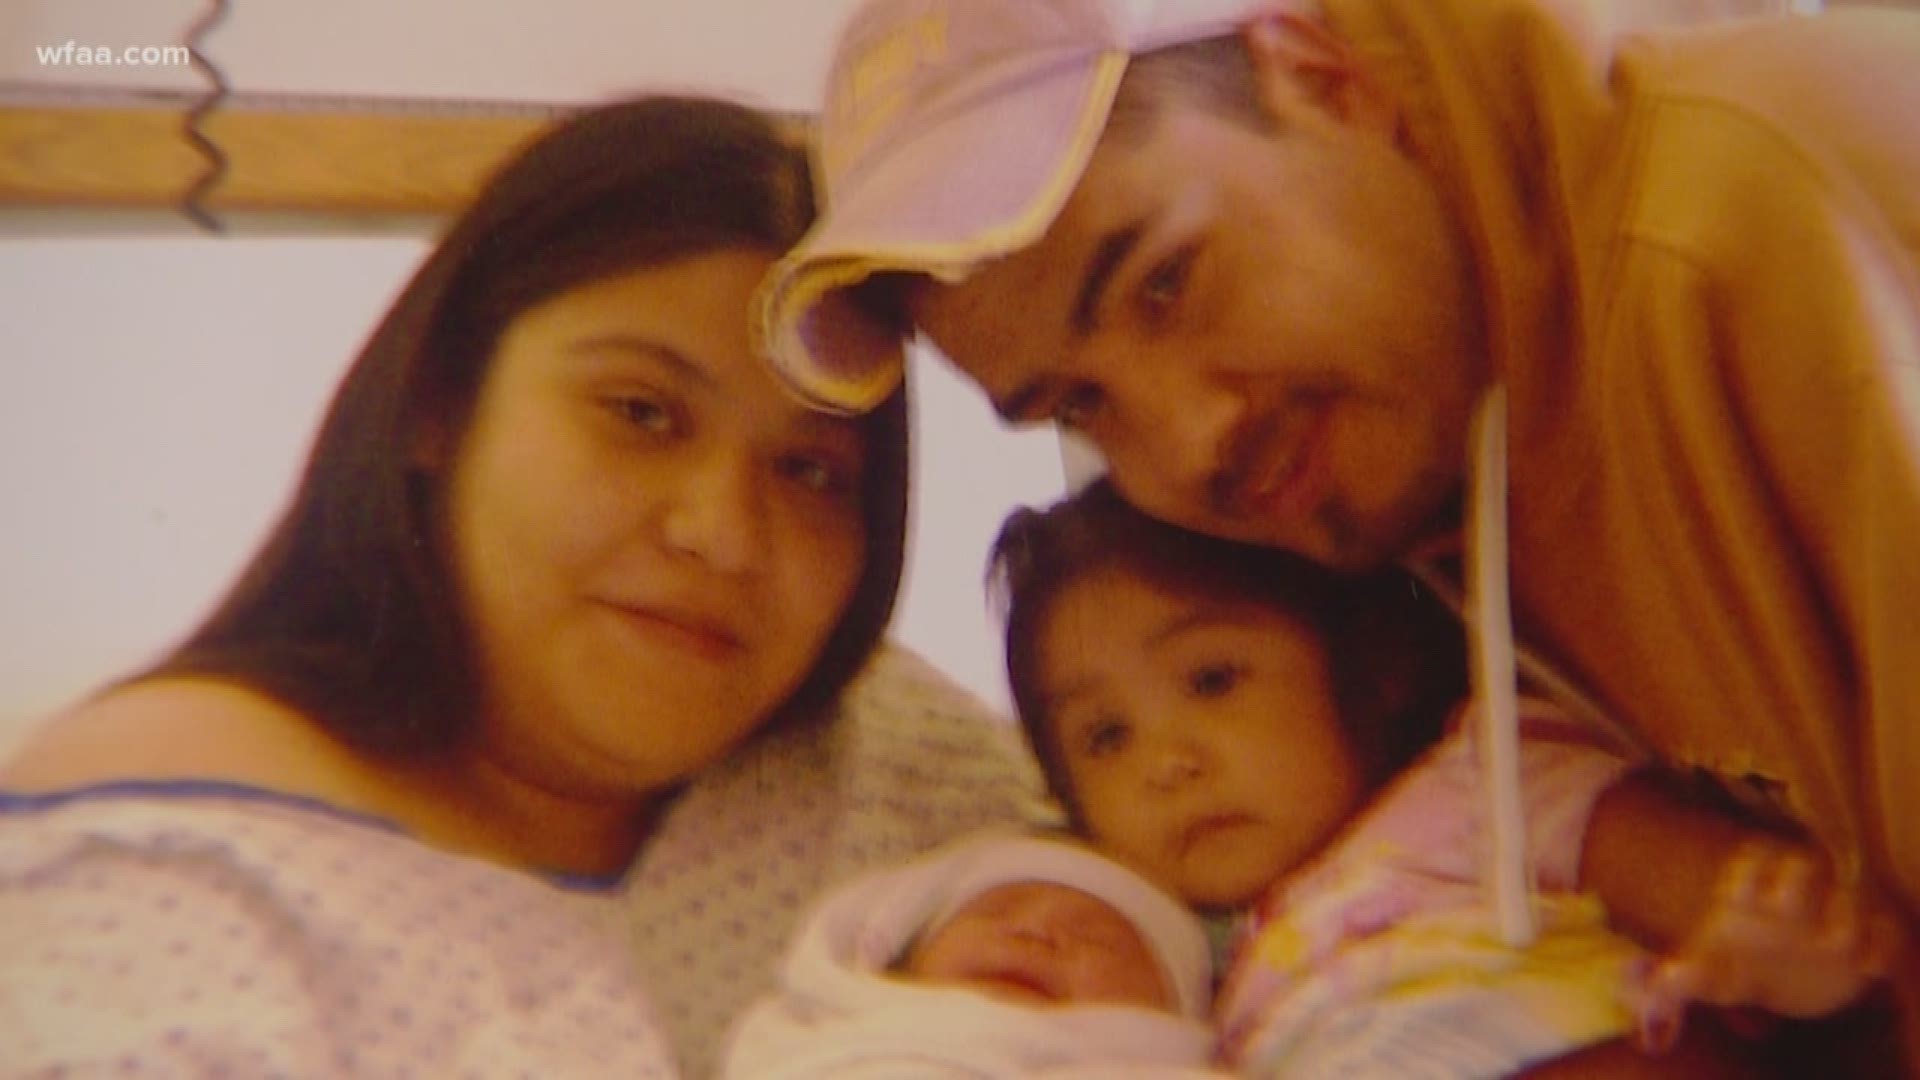 Daughters orphaned after suspected drunk driver kills parents on I-45